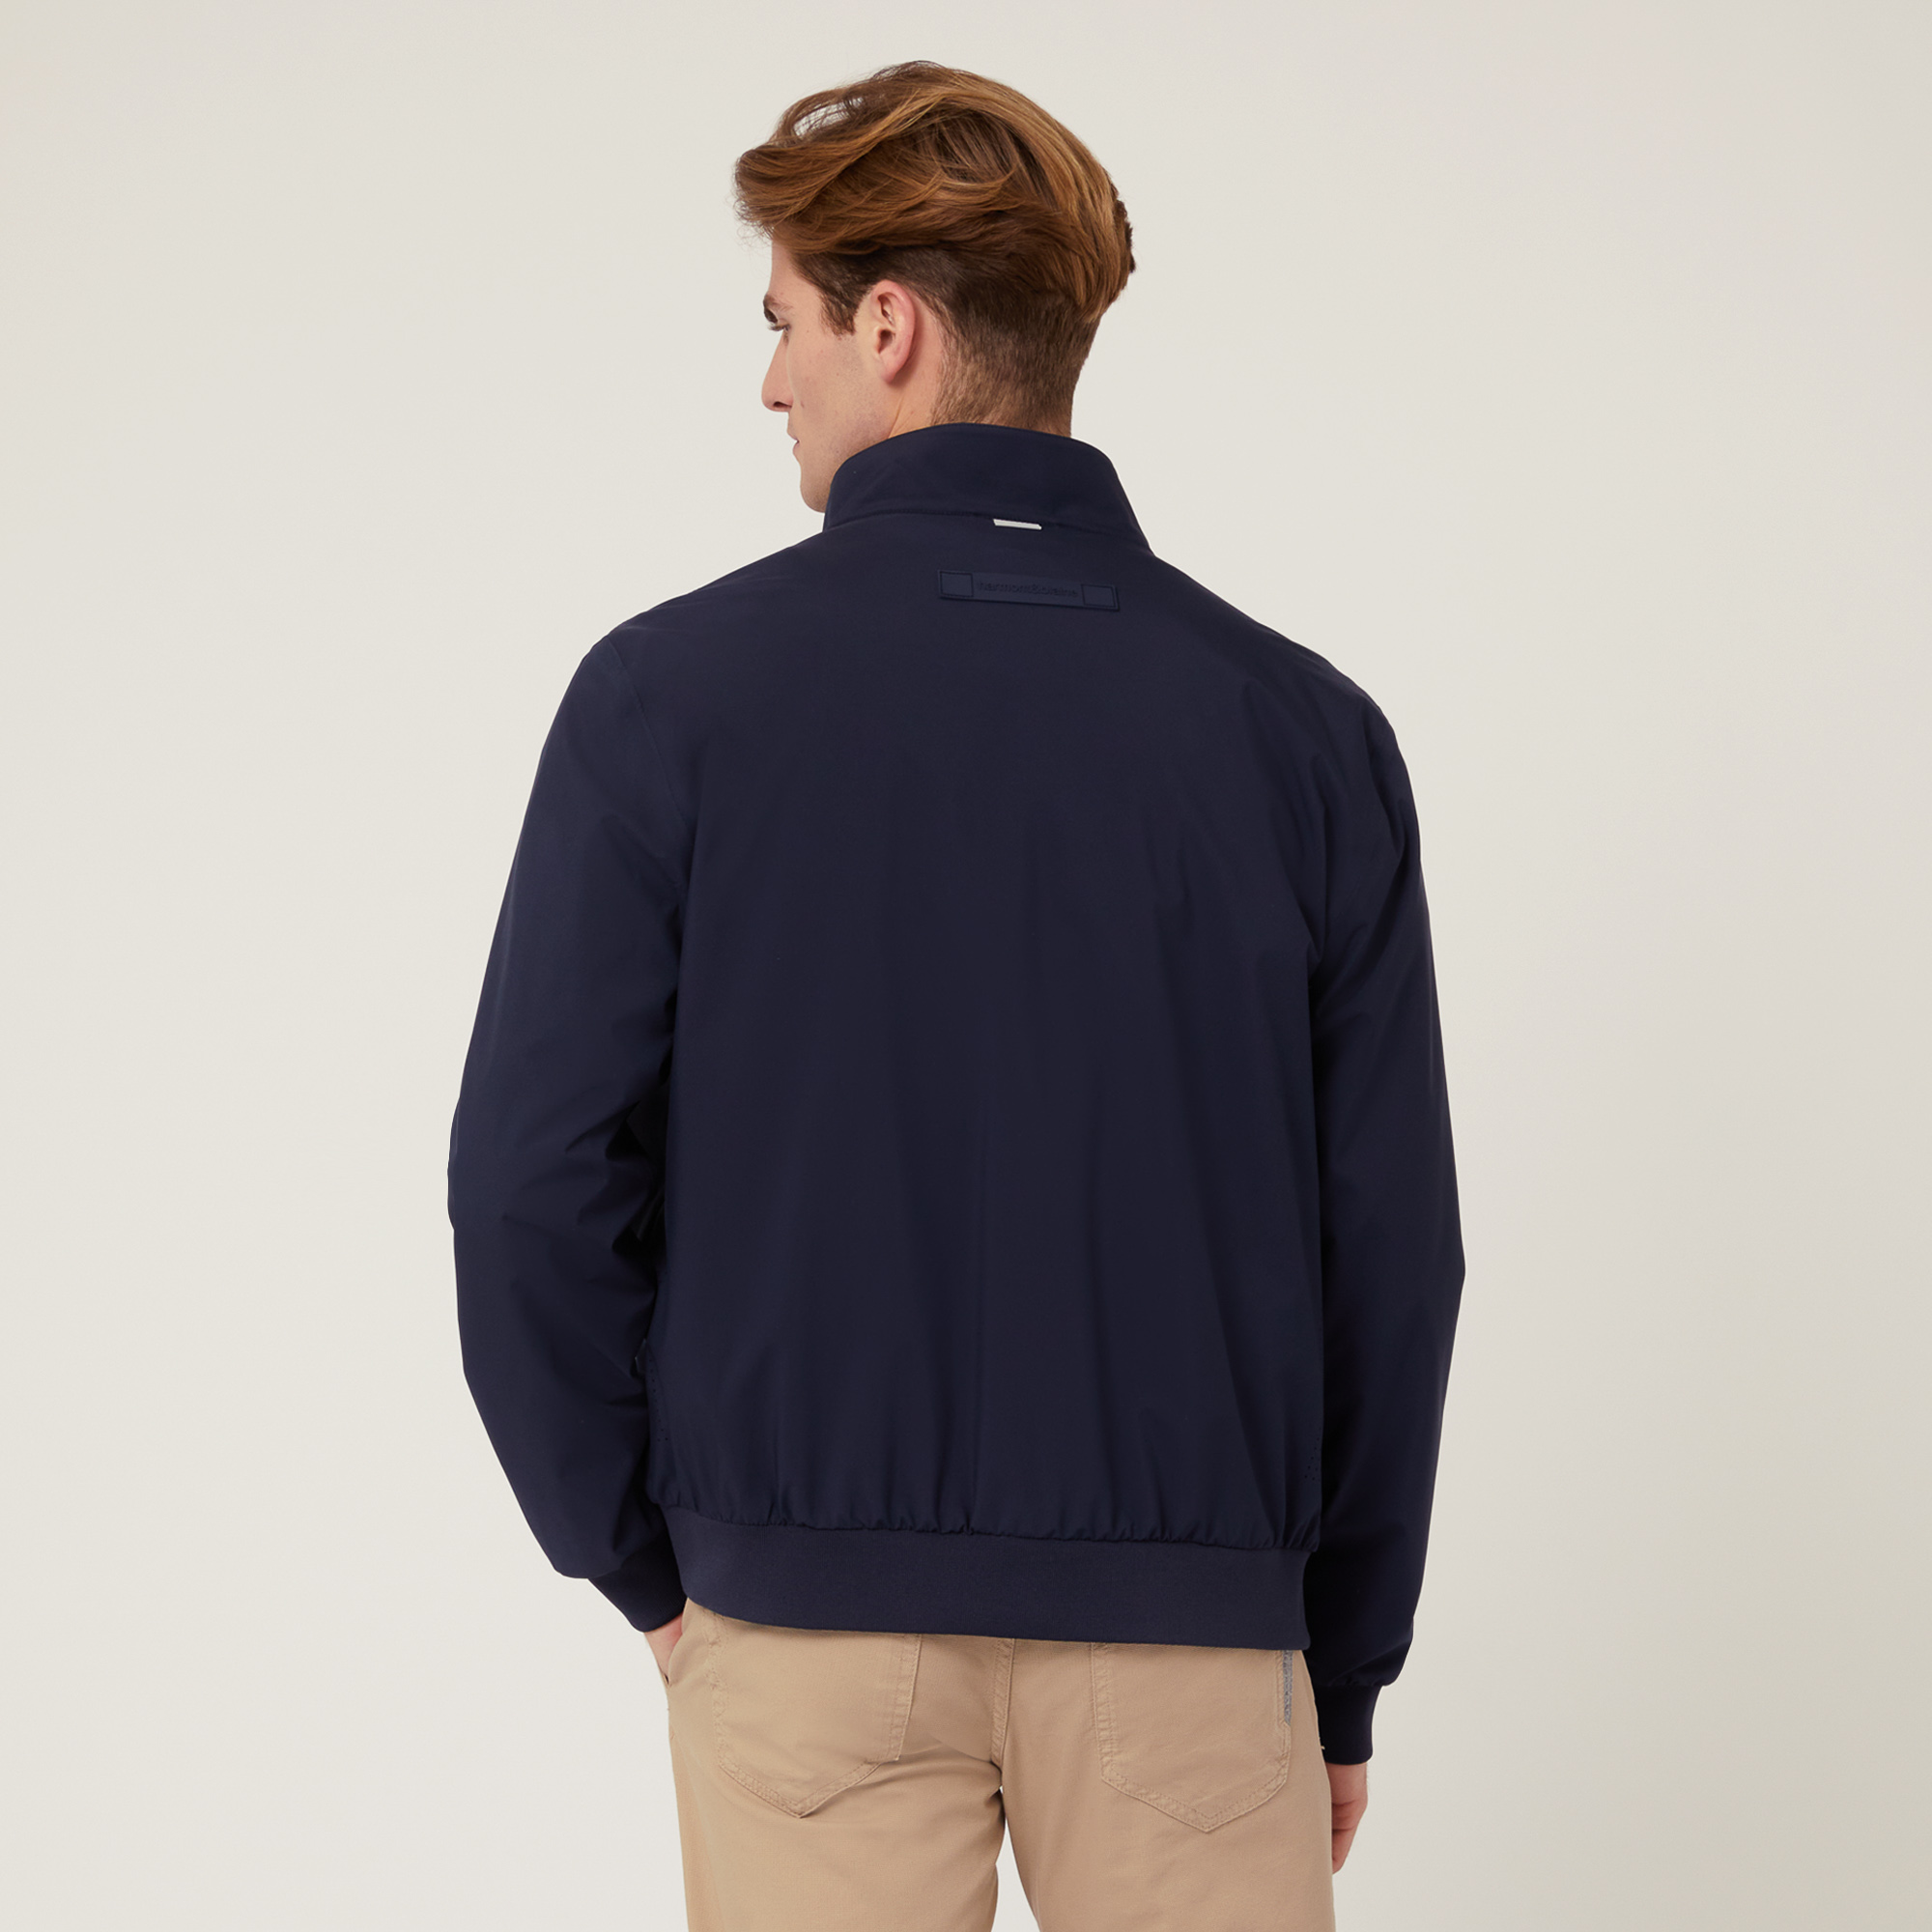 Giubbotto In Softshell, Blu Navy, large image number 1